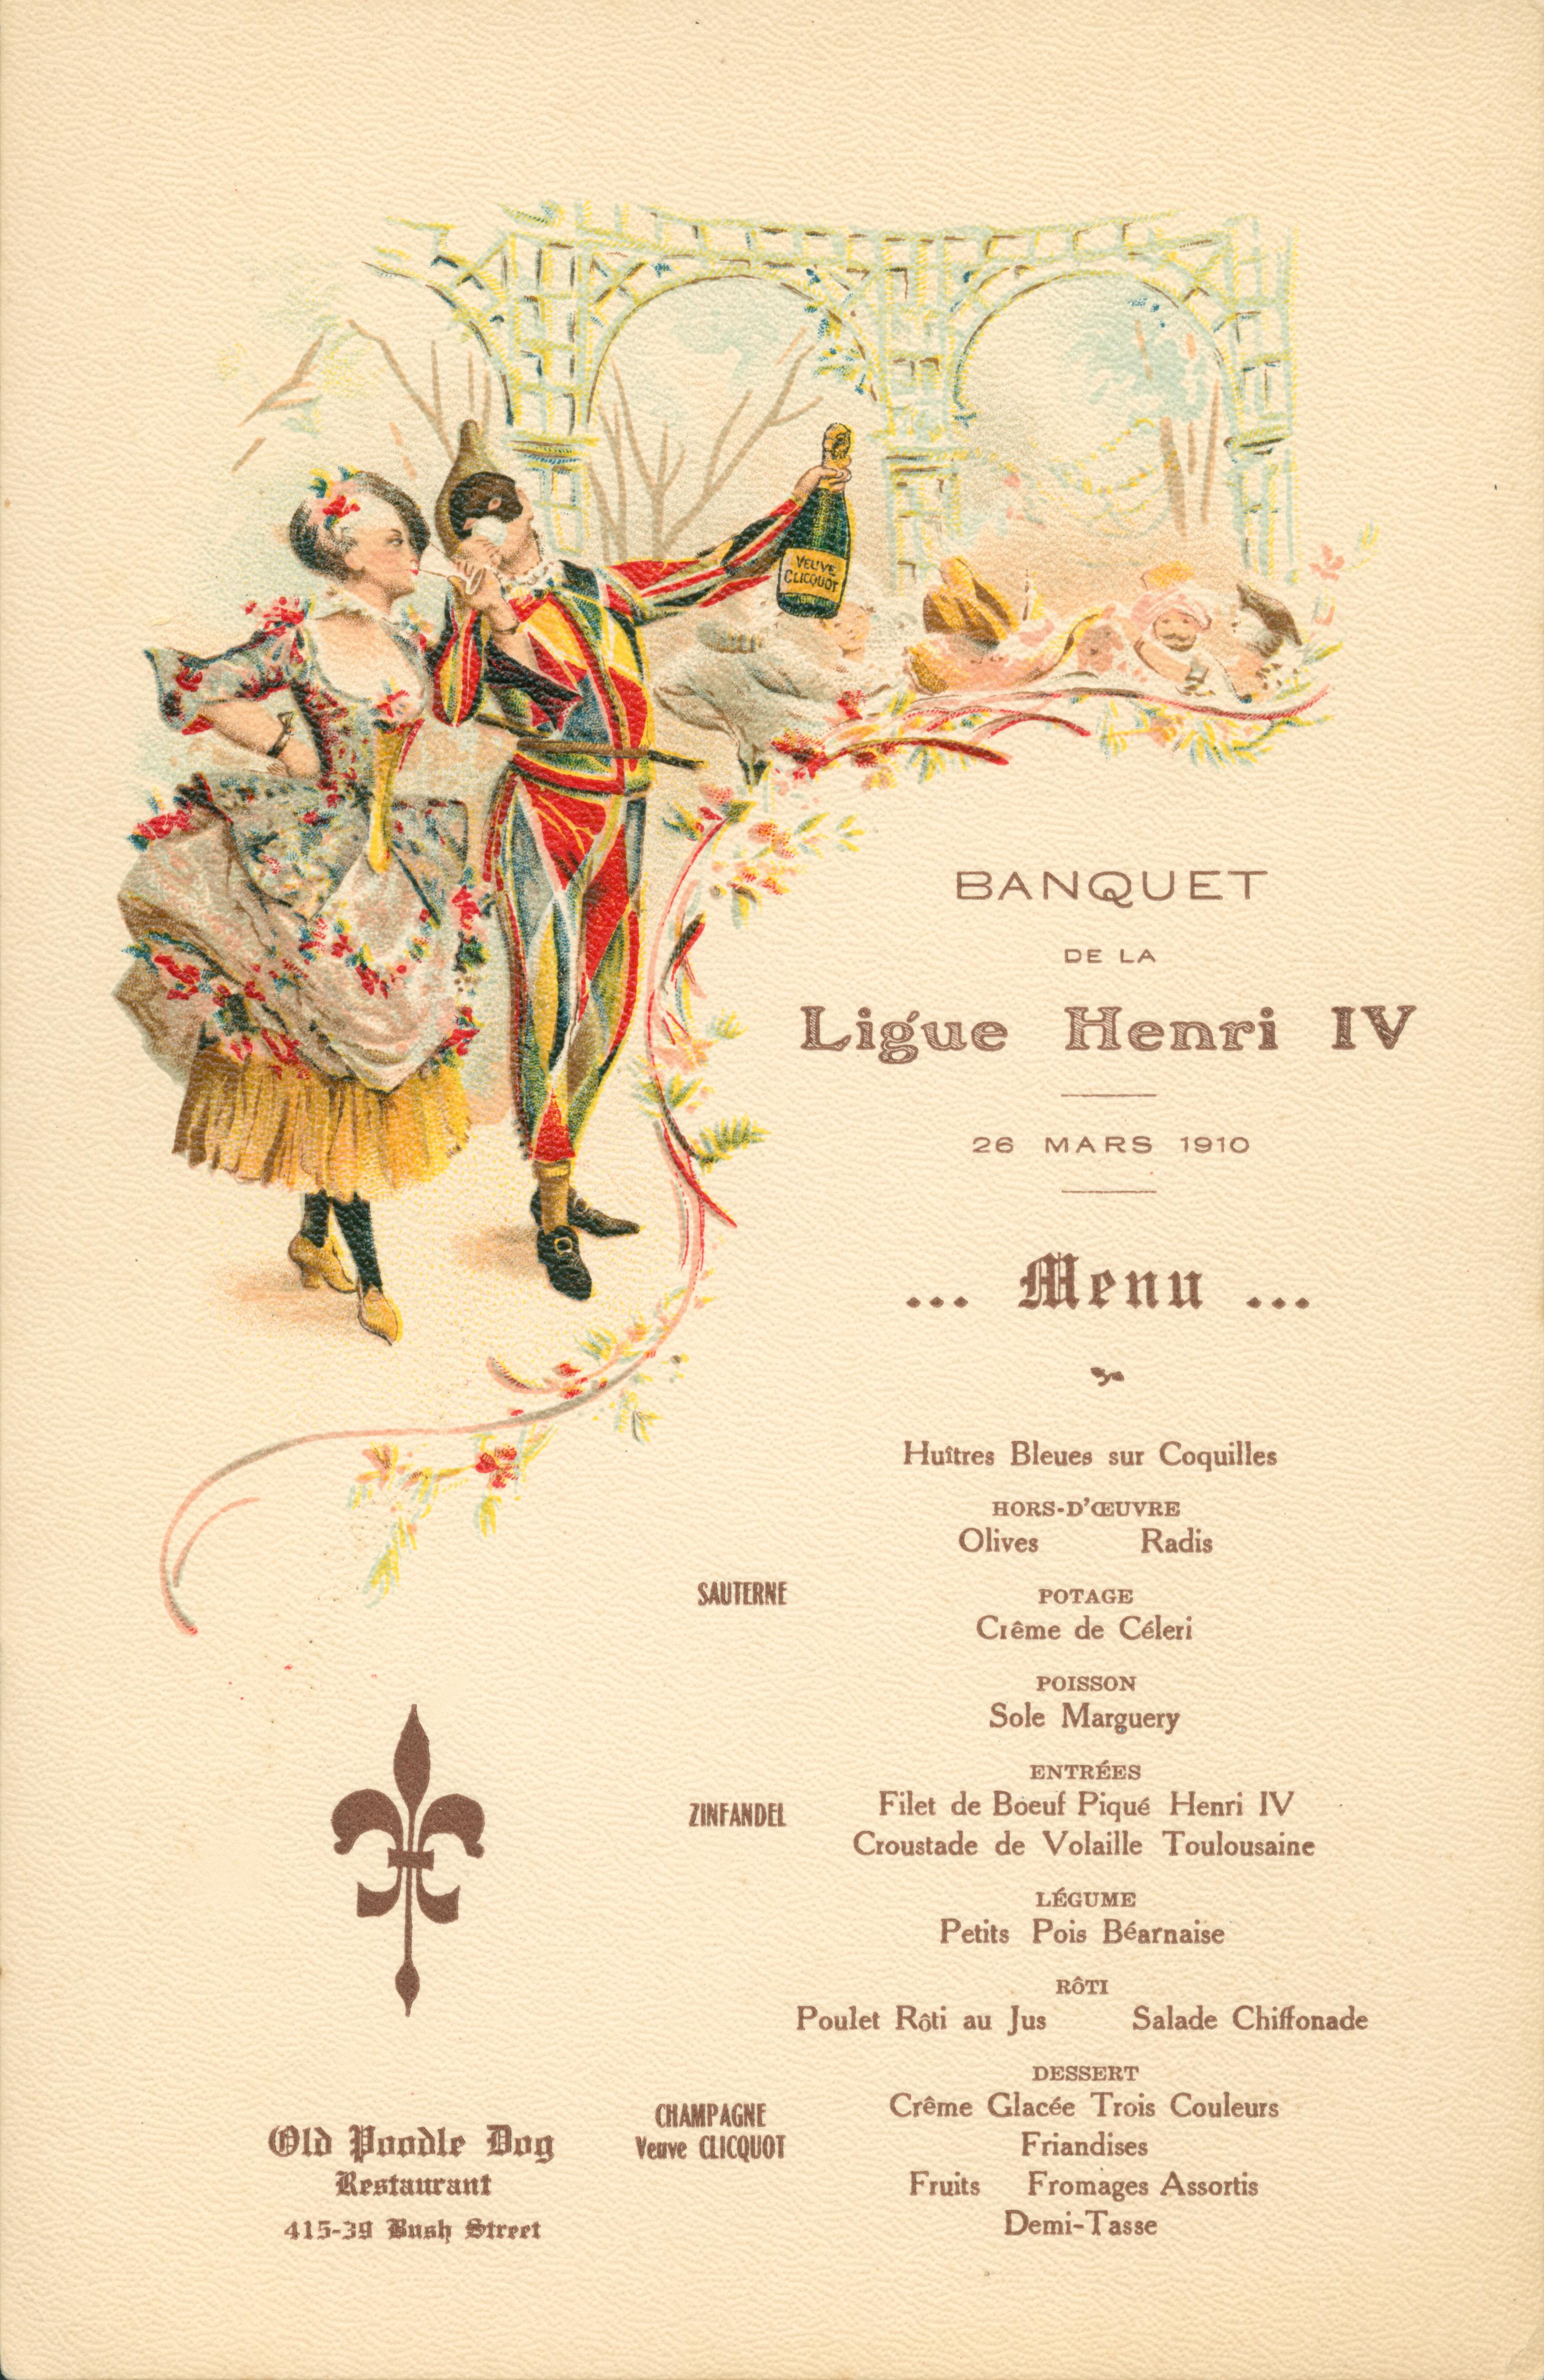 Menu includes an illustration of a person dressed as a harlequin holding a bottle of champagne and a woman in a dress with a tight, low-cut bodice.